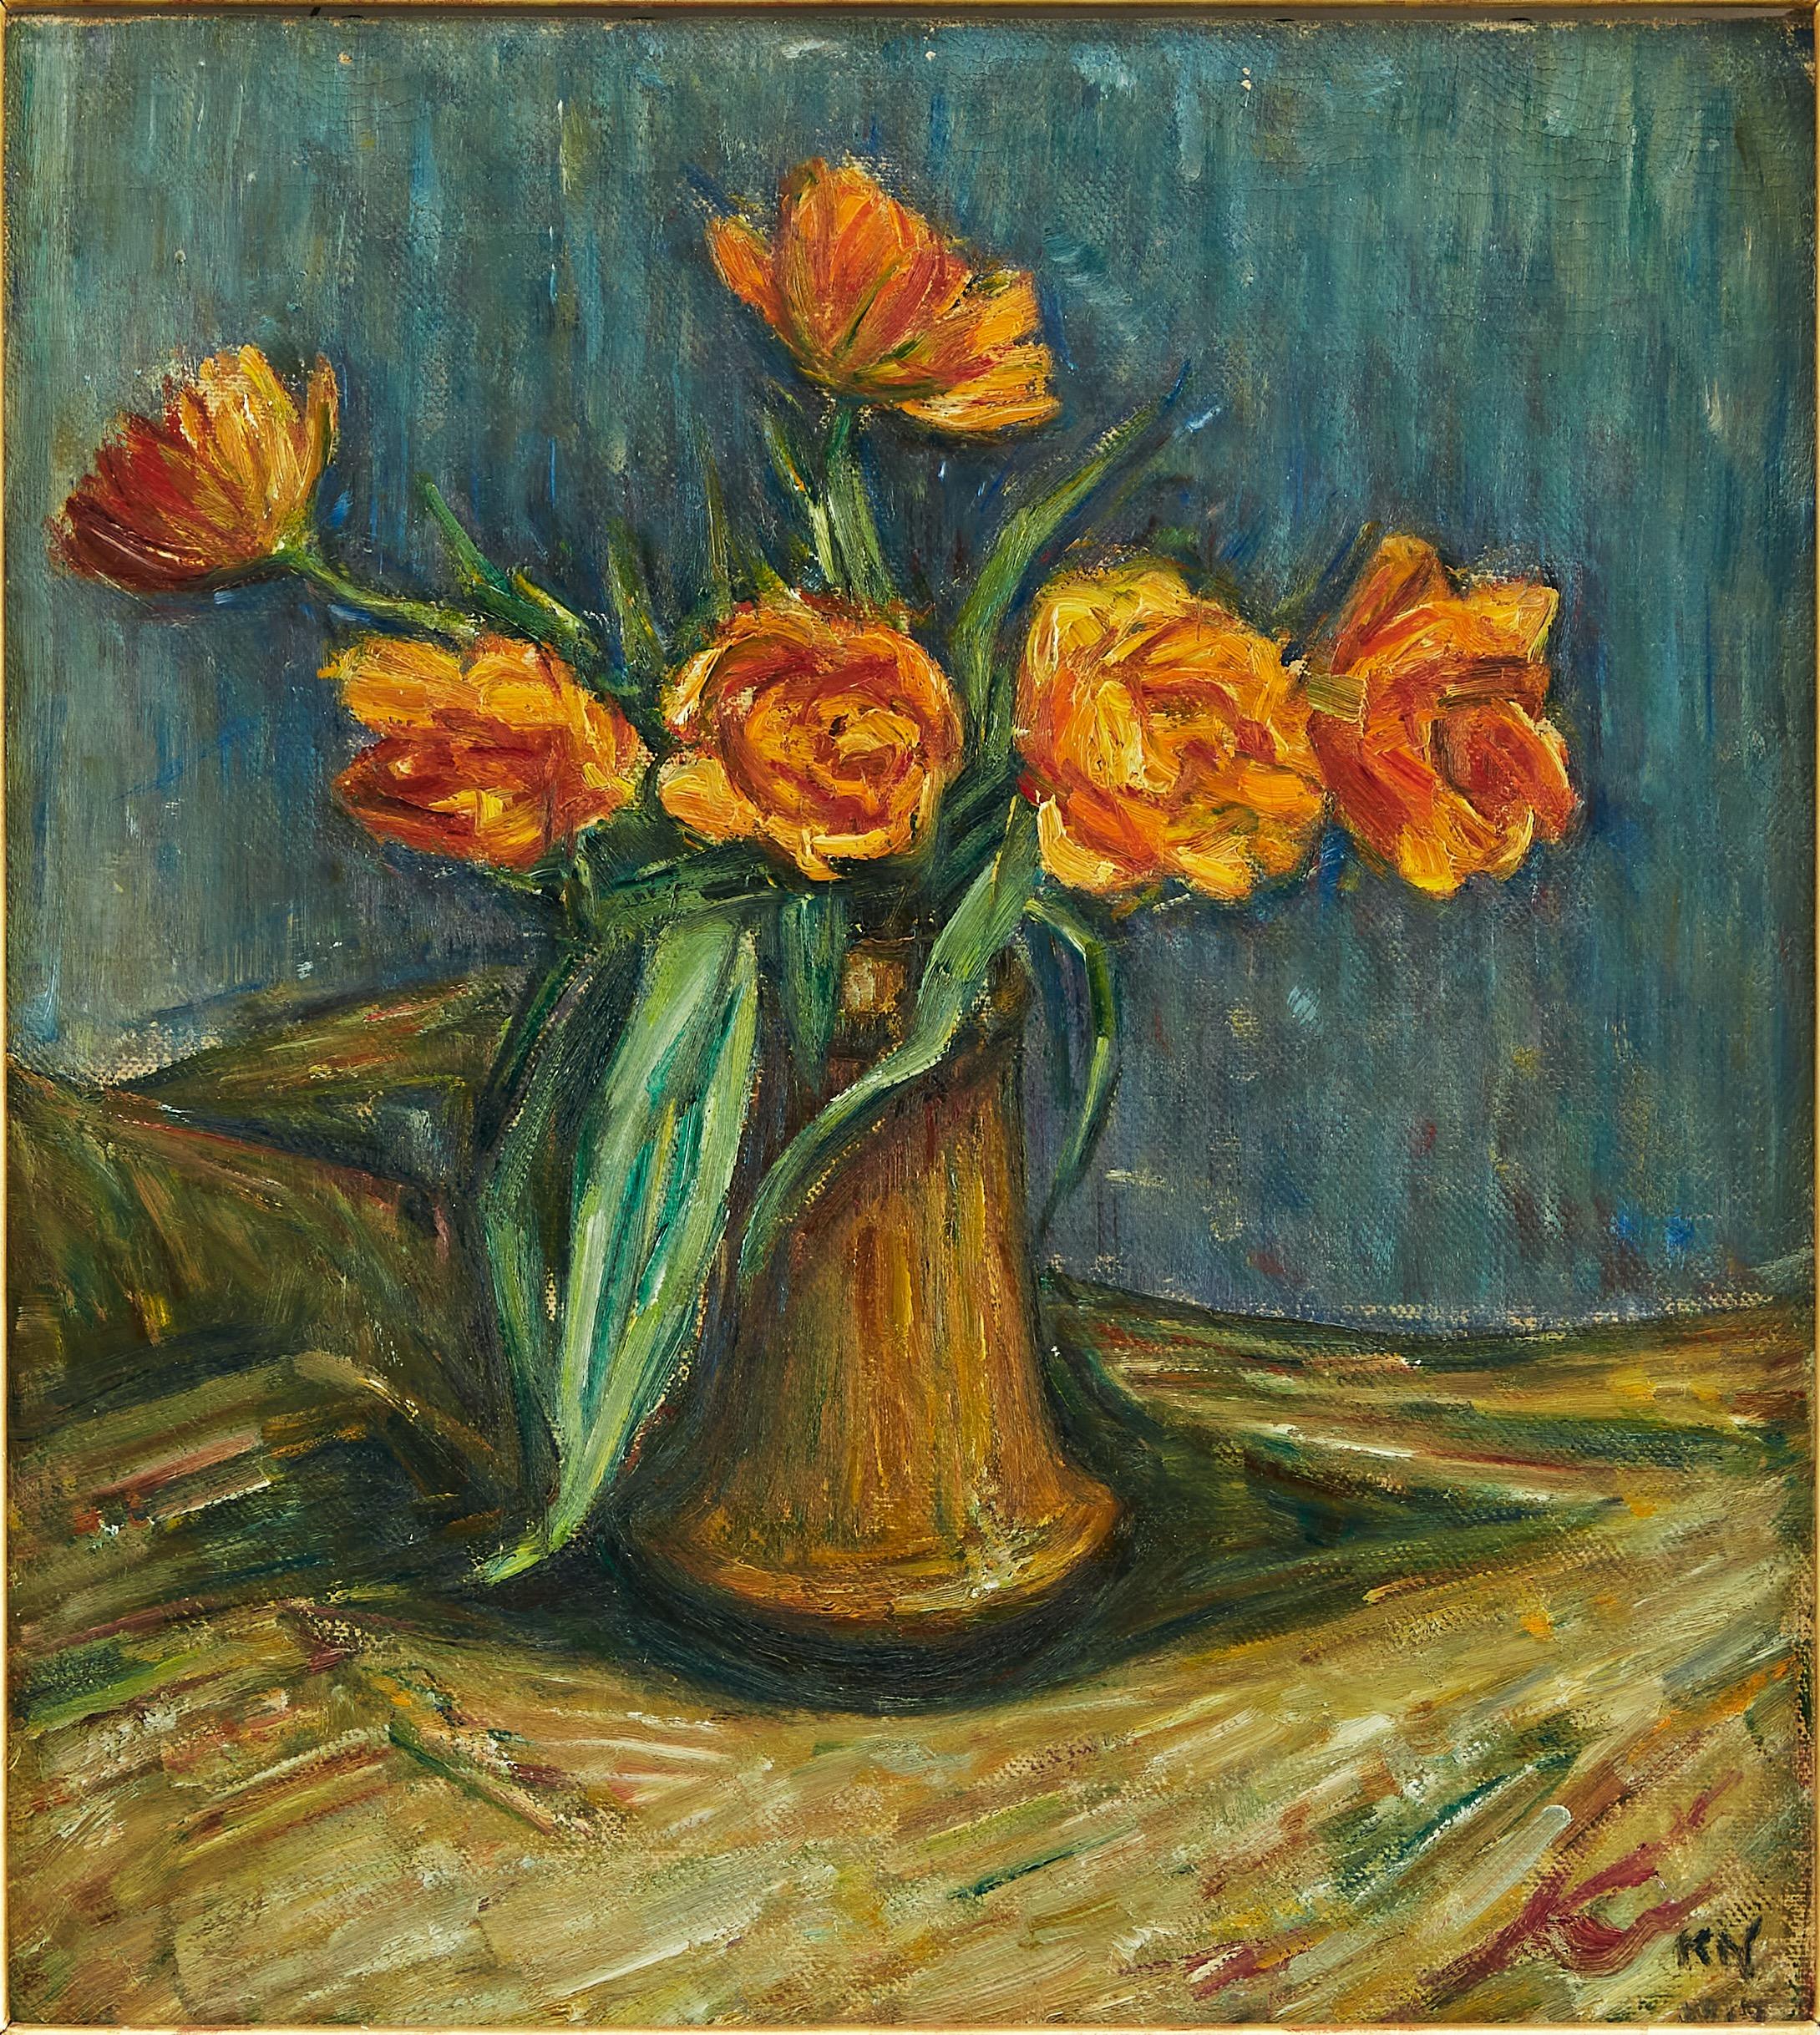 A beautiful still-life of yellow and red tulips in a vase by Karl Nordström (1855-1923), signed 'KN' and dated a tergo 1917. The vibrant flowers are standing in a vase which is placed on a cloth against a bluish-green background.  

Karl Fredrik